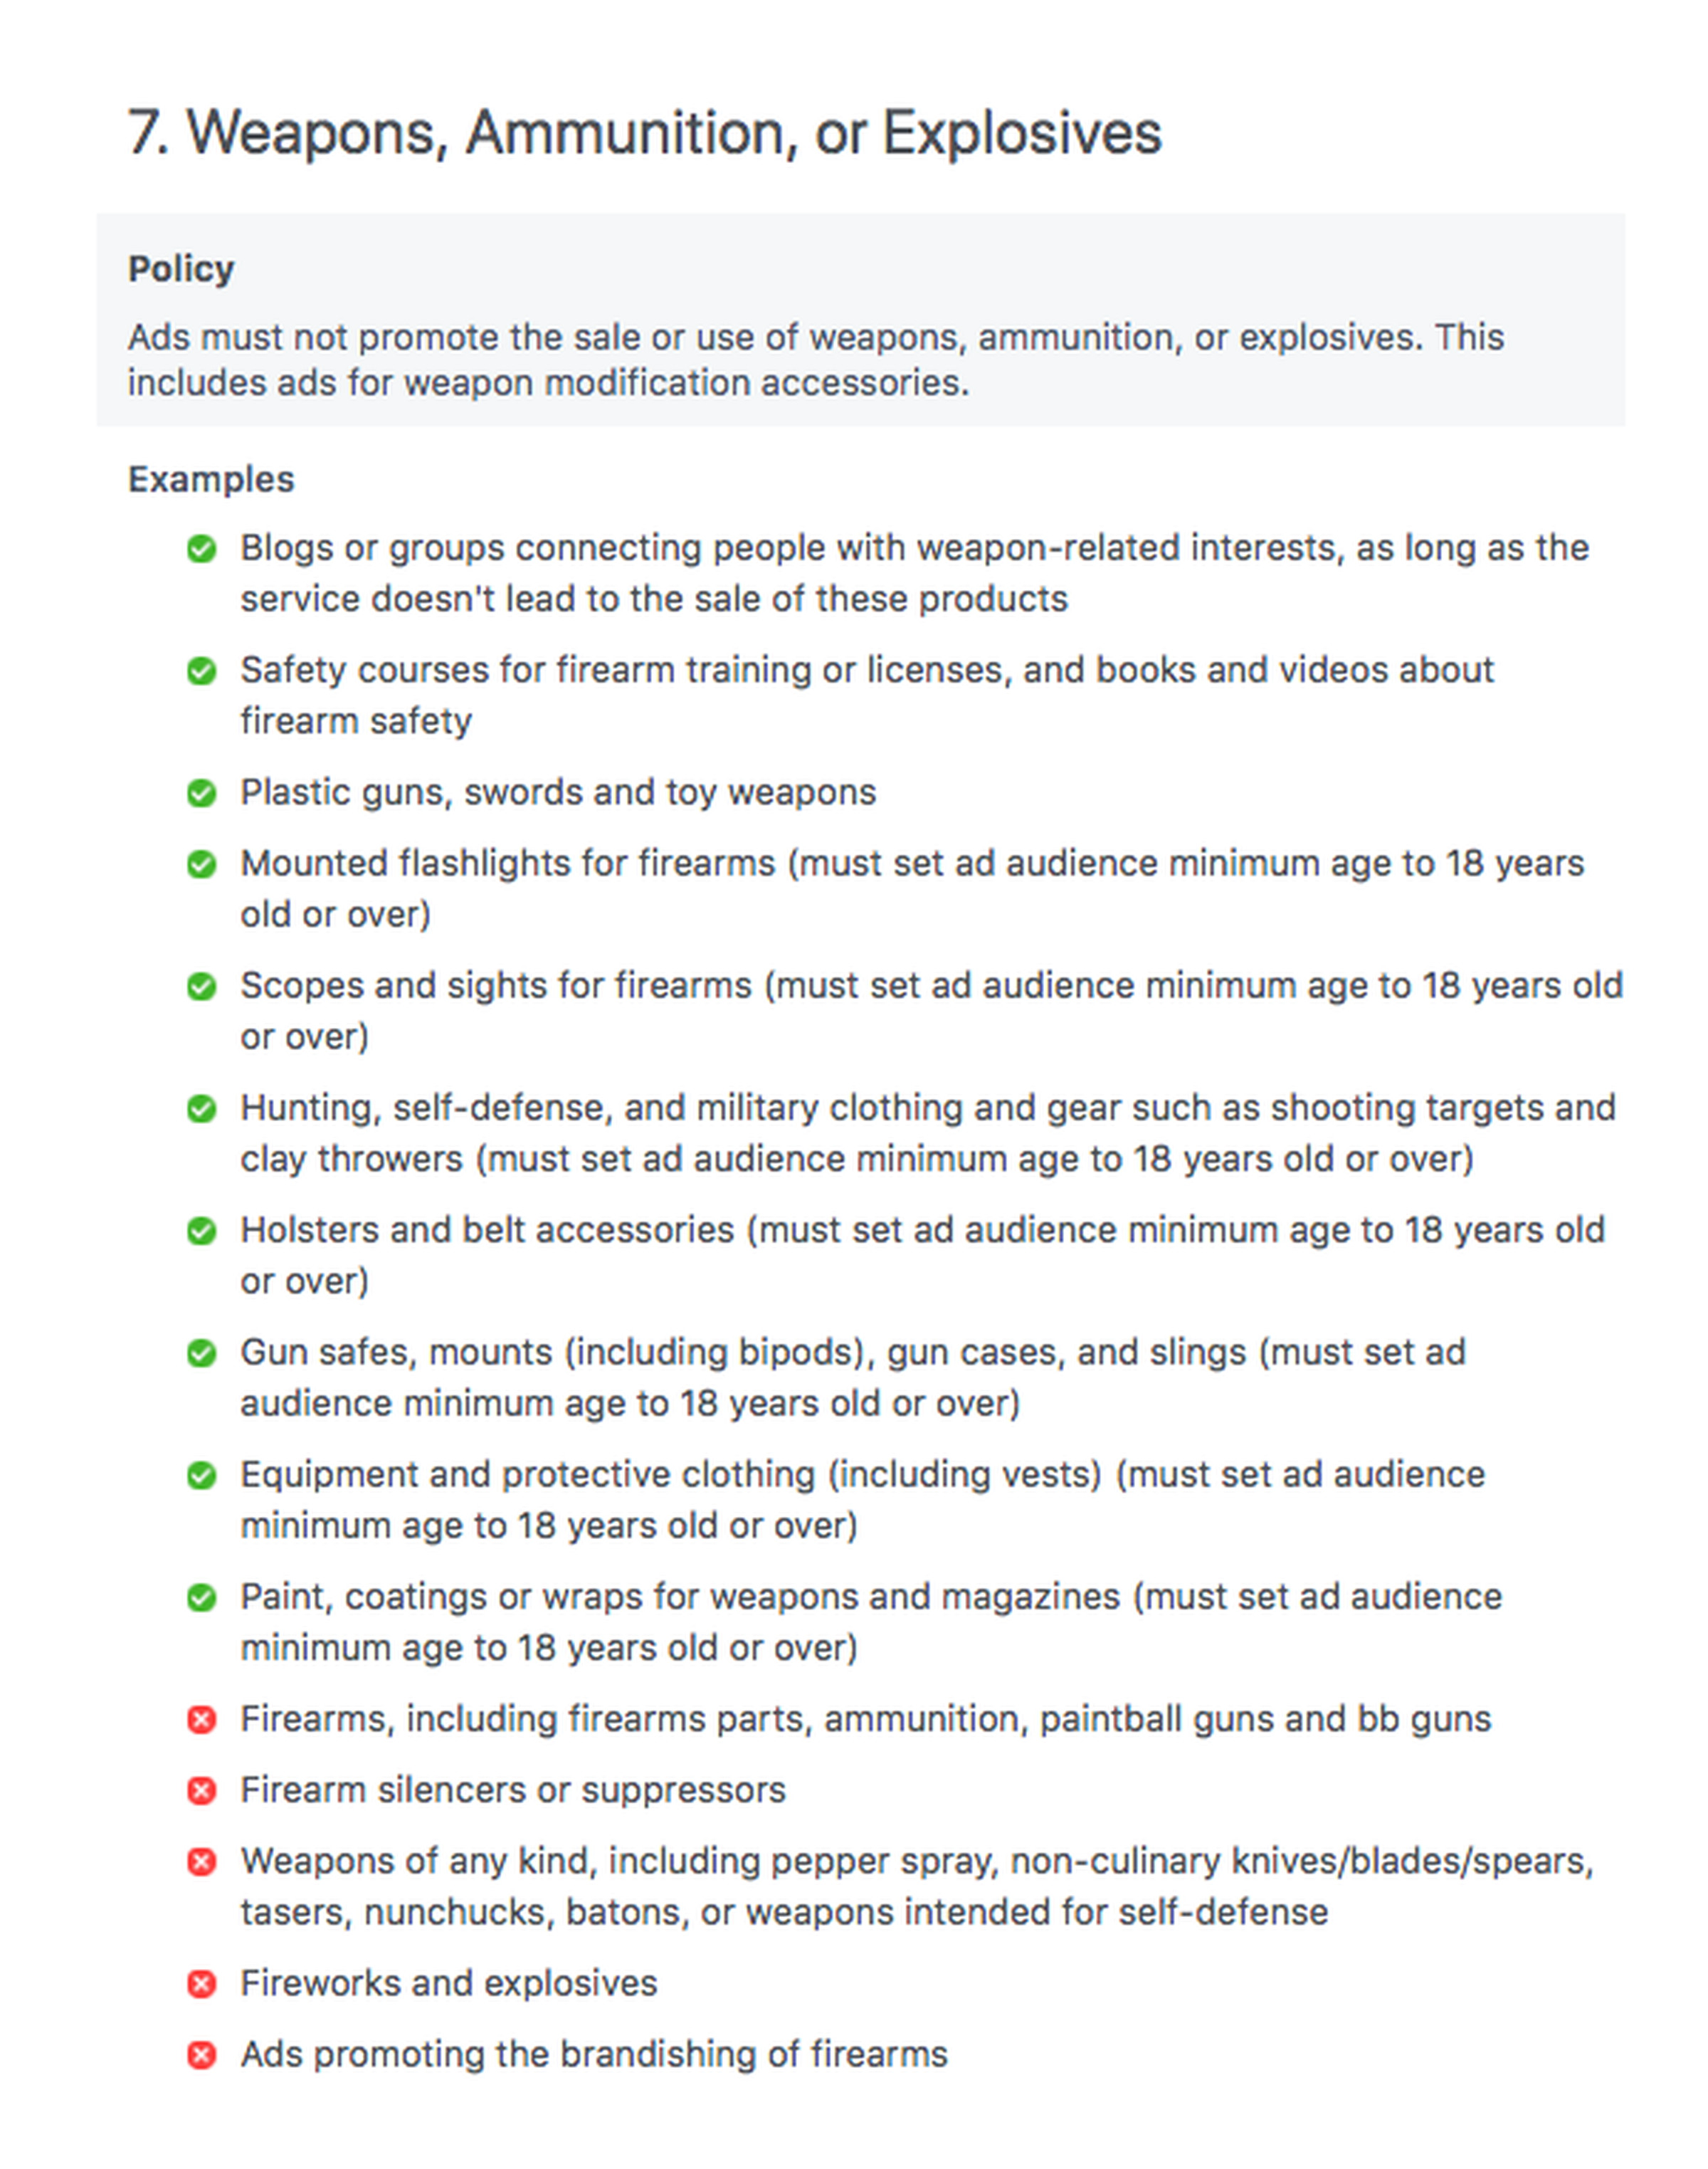 Facebook’s updated ad policies, which will go into effect on June 21st.